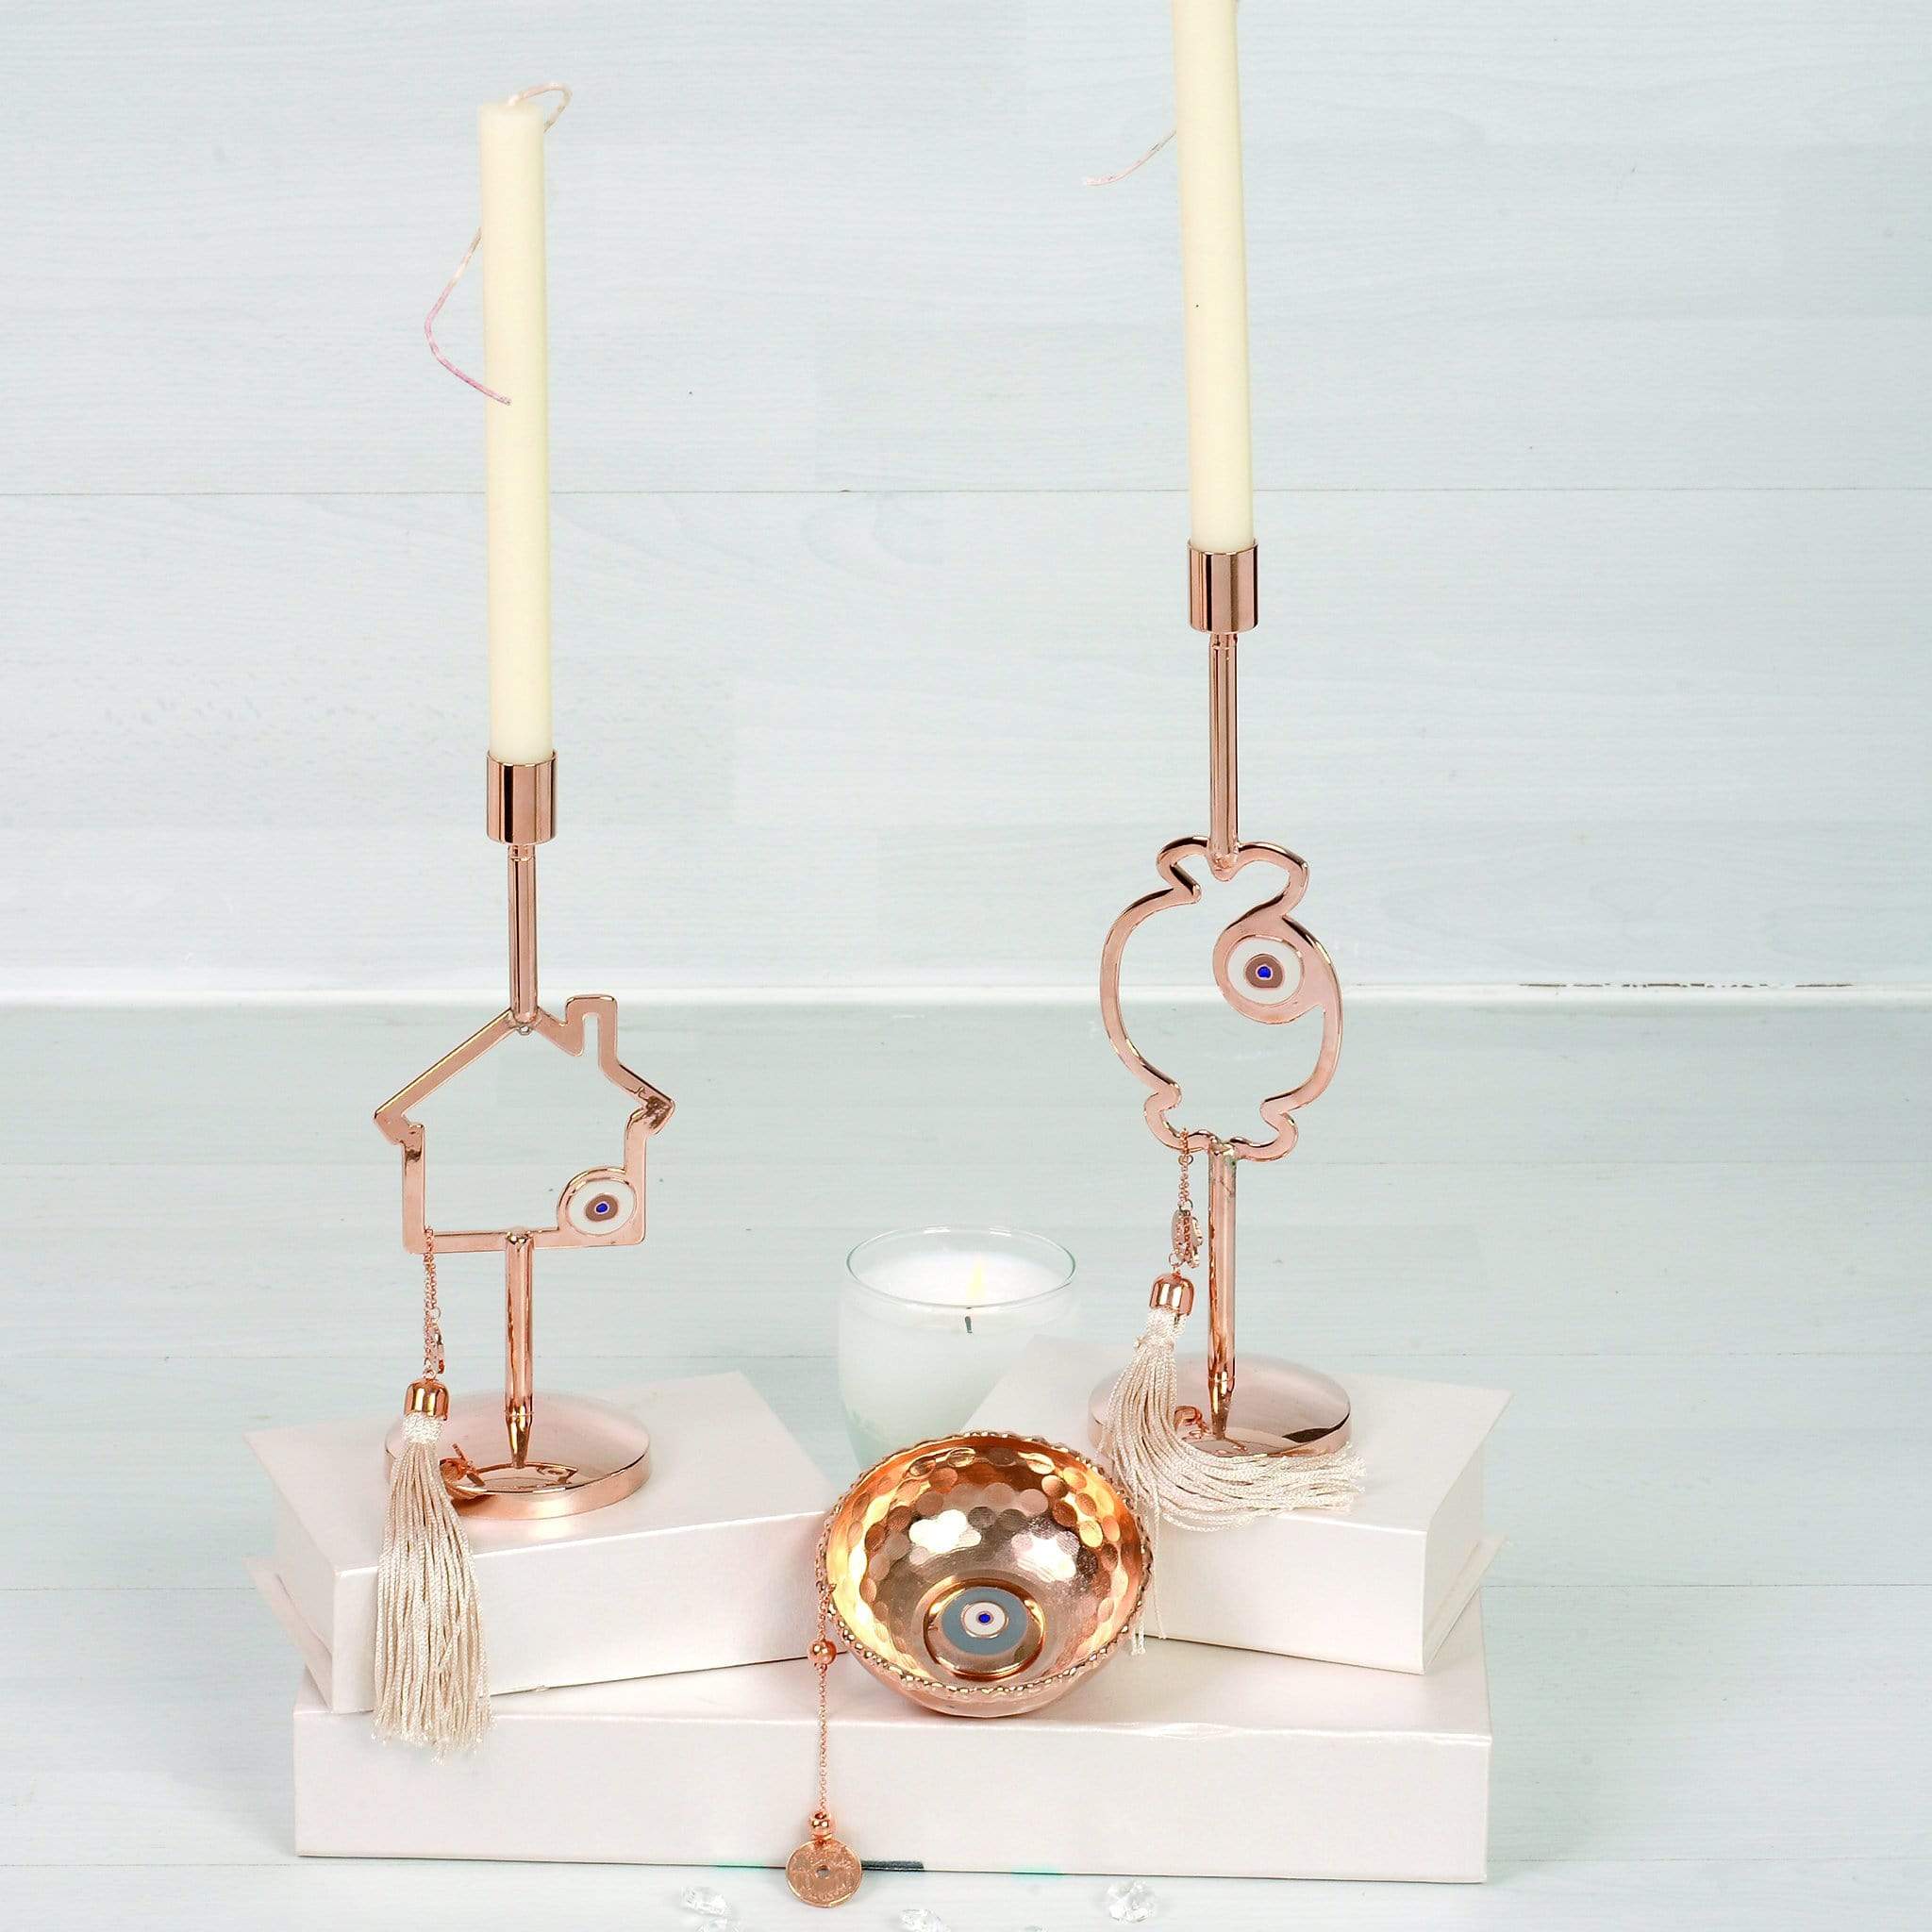 "Mati" Eye Candlesticks and Table Top Bowl